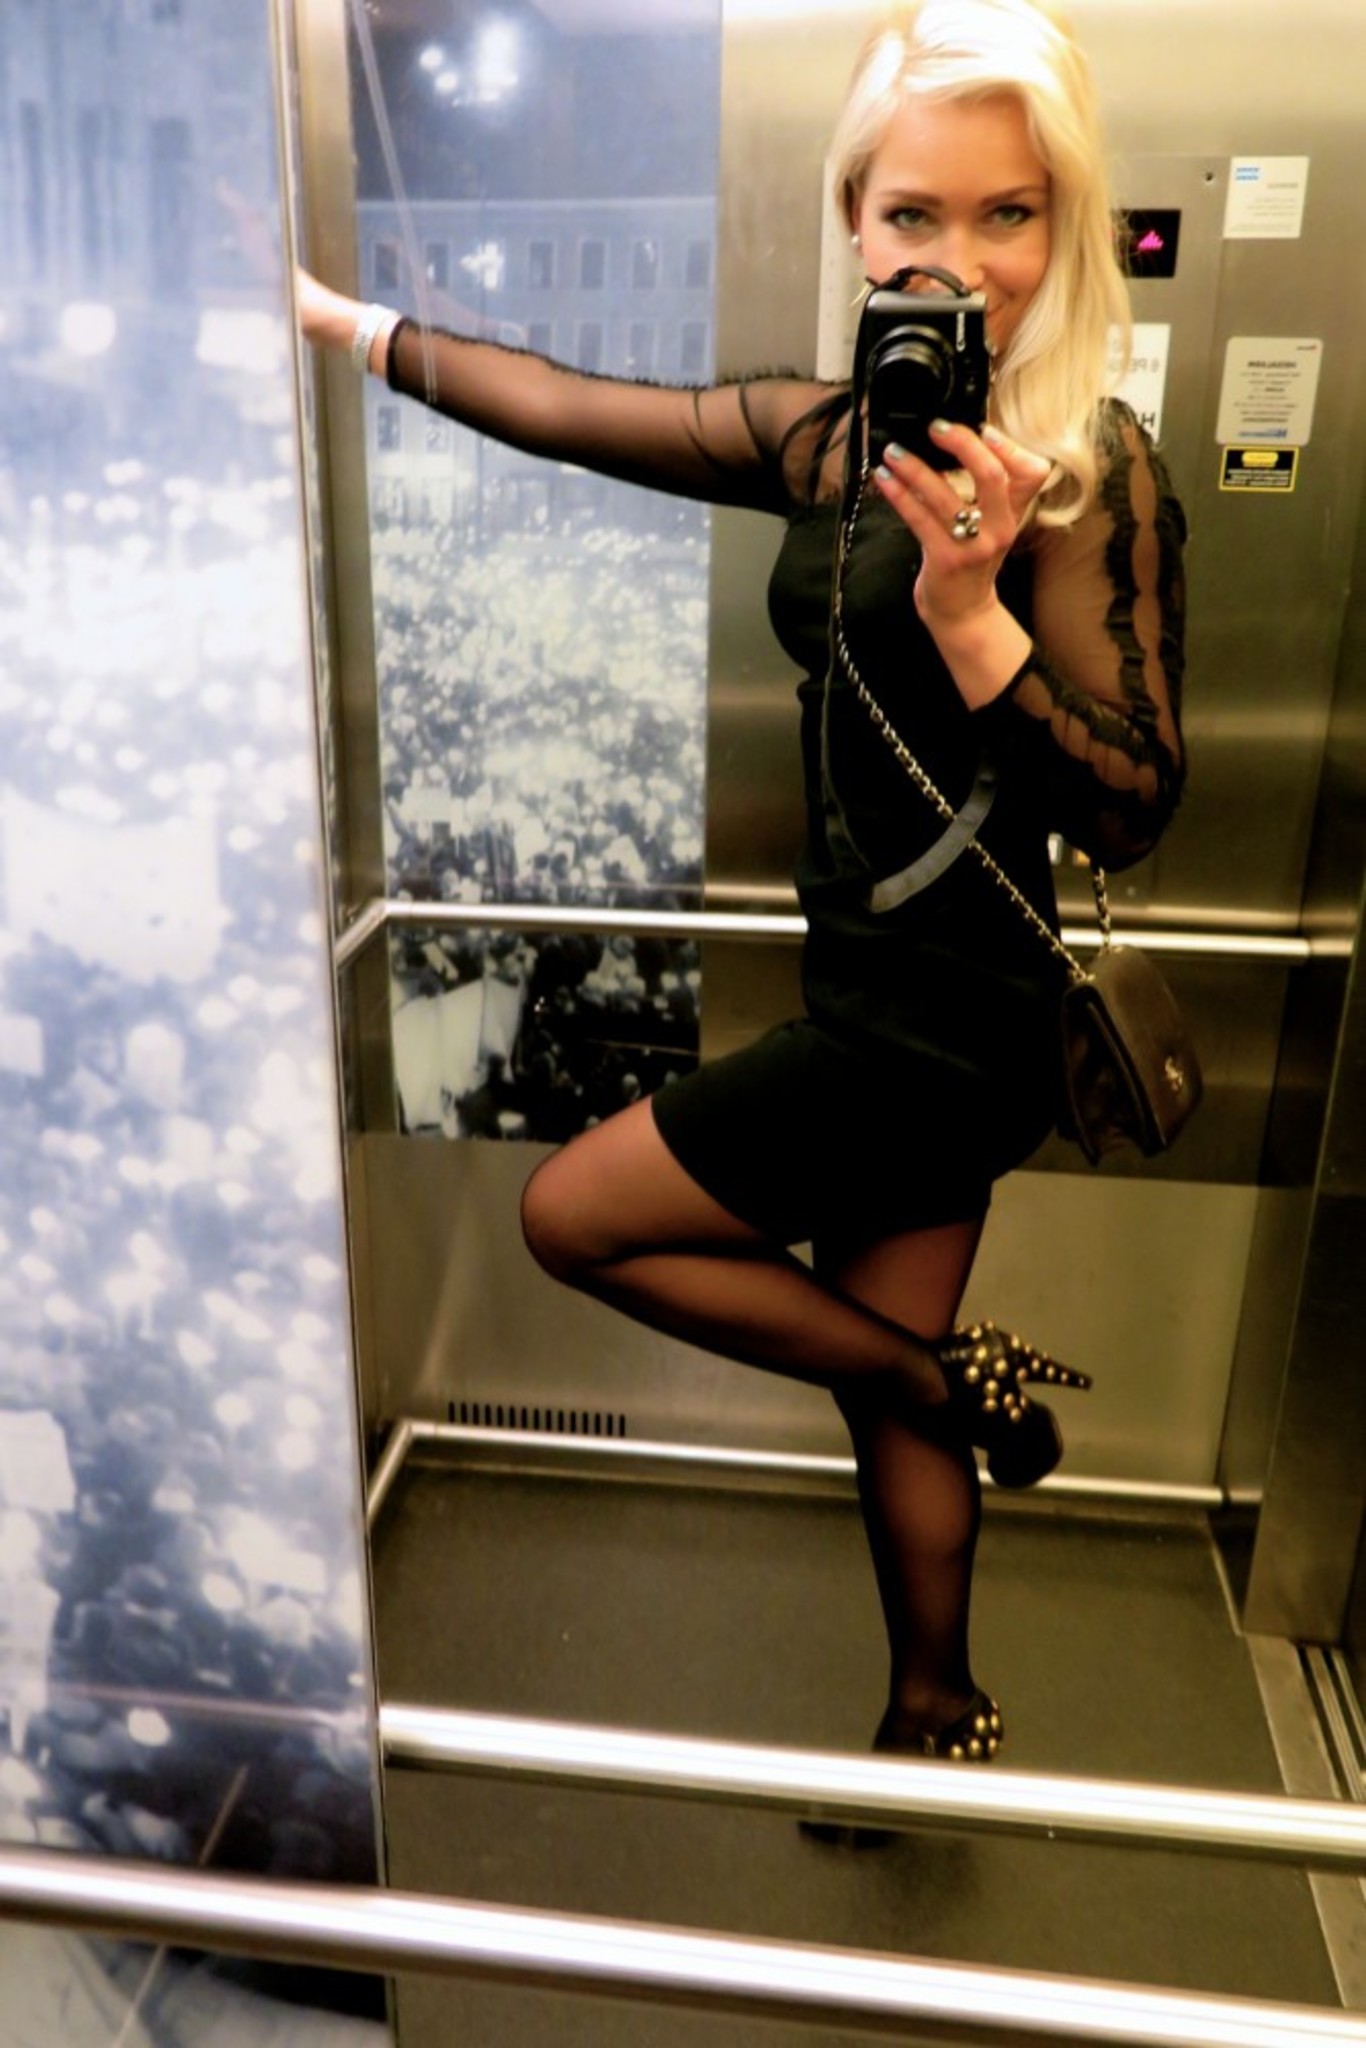 Elevator Selfie is a MUST, on my way to STRATOS to celebrate #FABGAB30